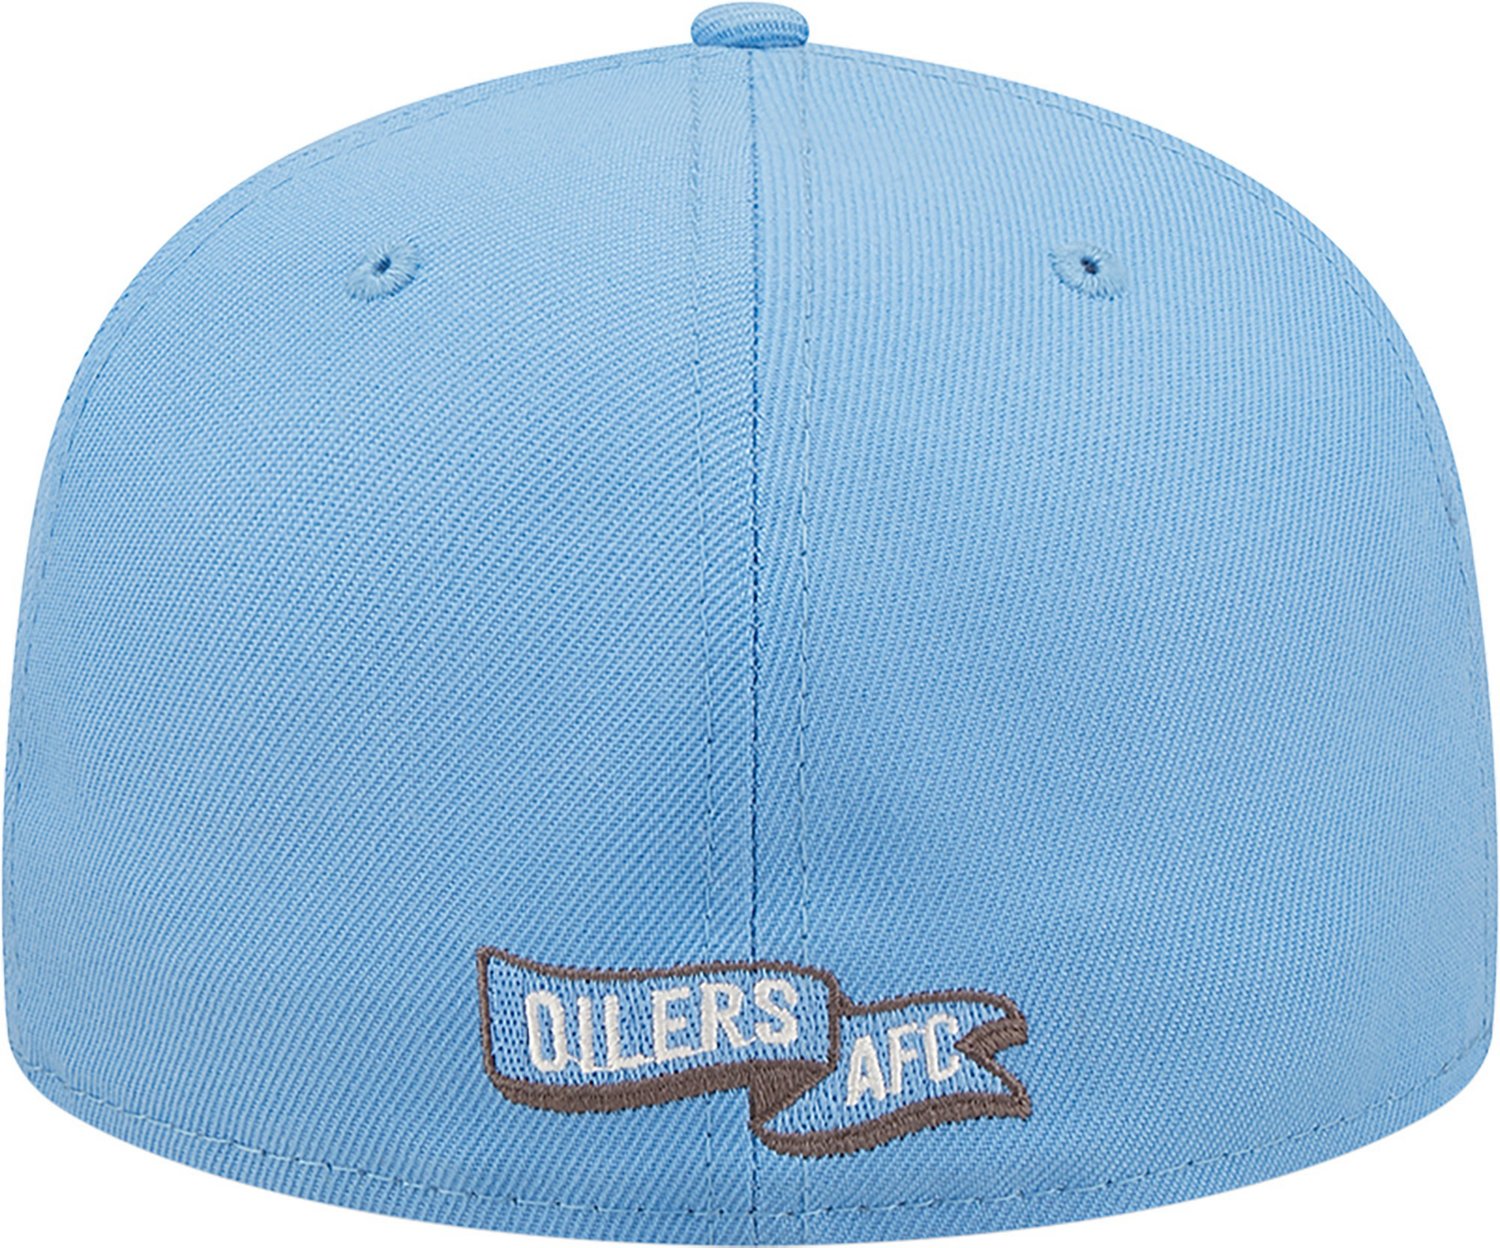 NEW ERA CAPS Houston Oilers Blue 59FIFTY Fitted Hat 70716031 - Karmaloop